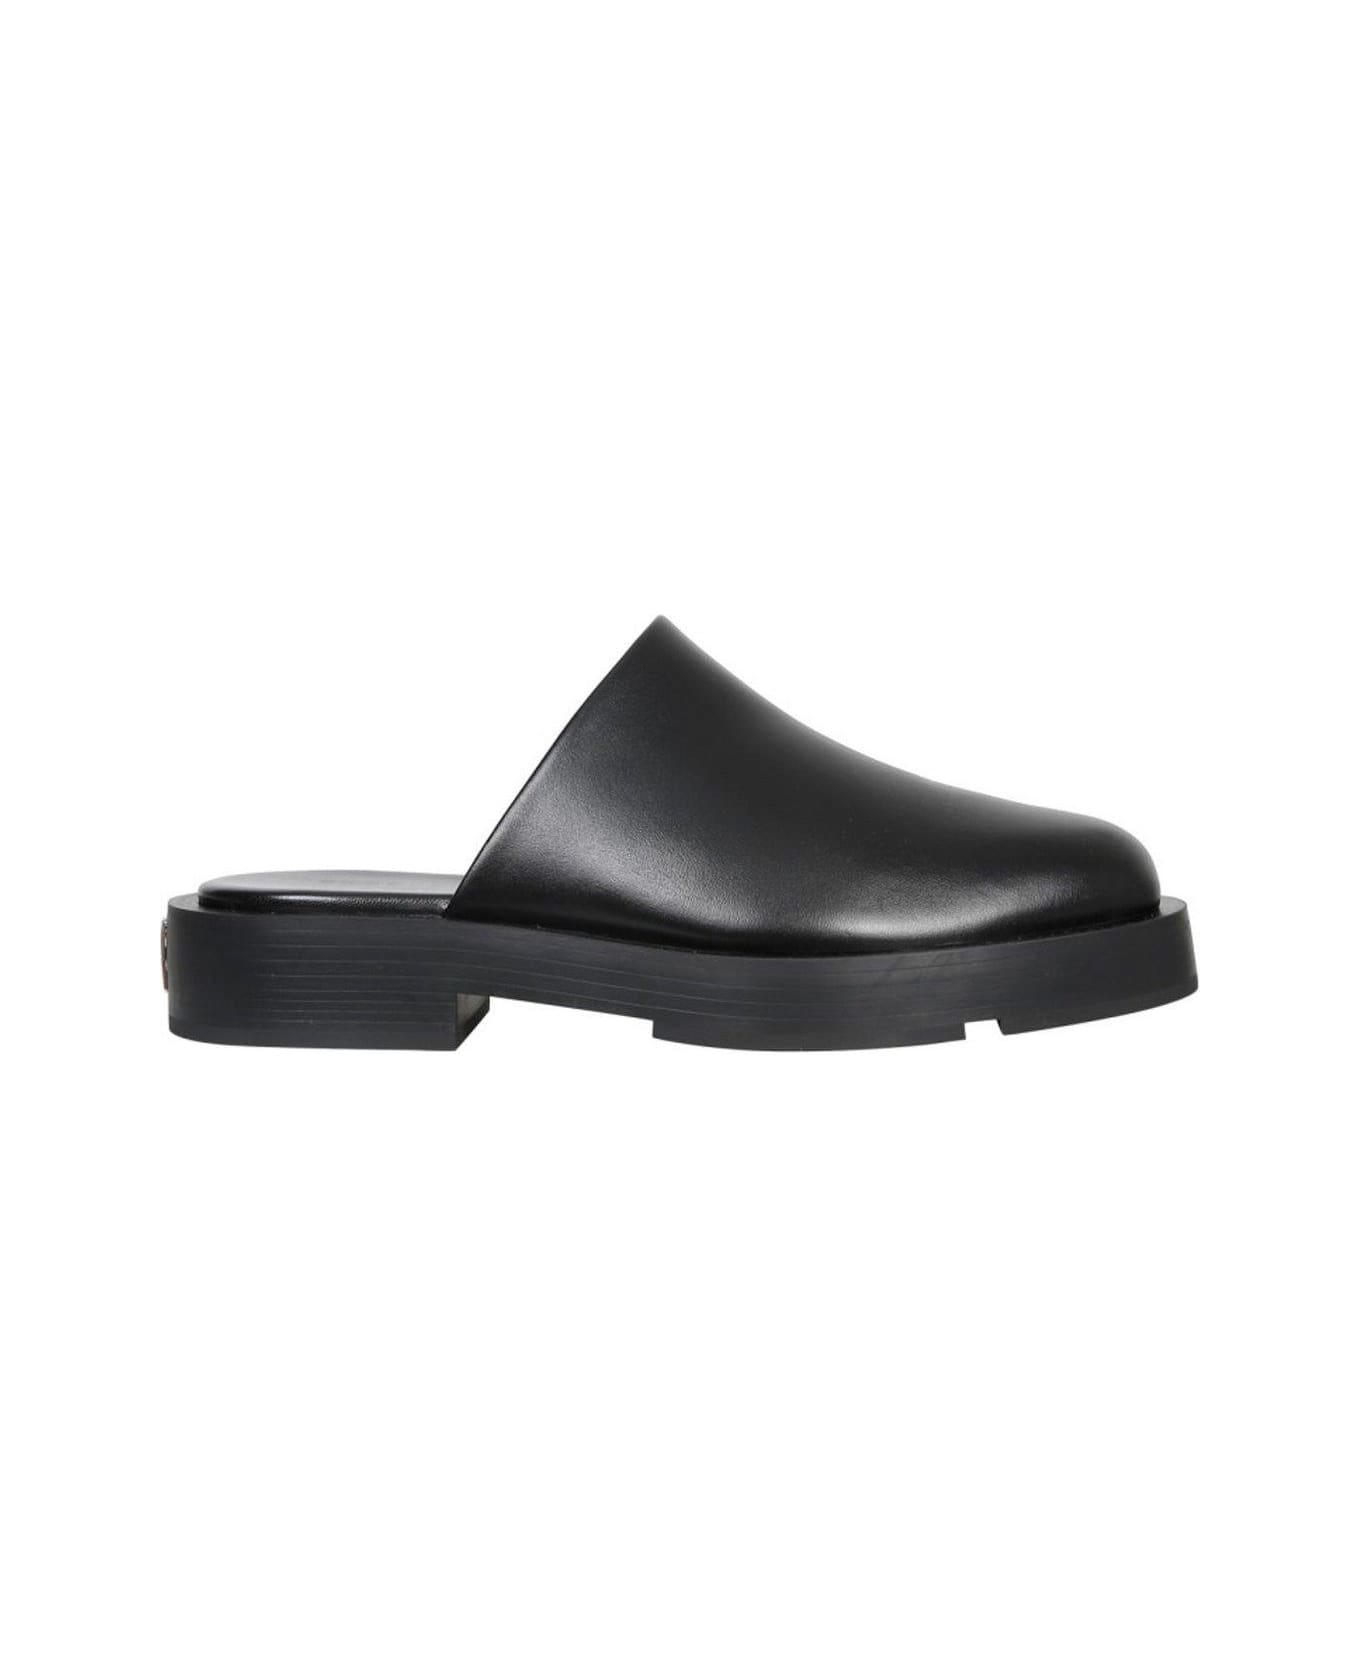 Givenchy 4g Plaque Square-toe Mules - BLACK